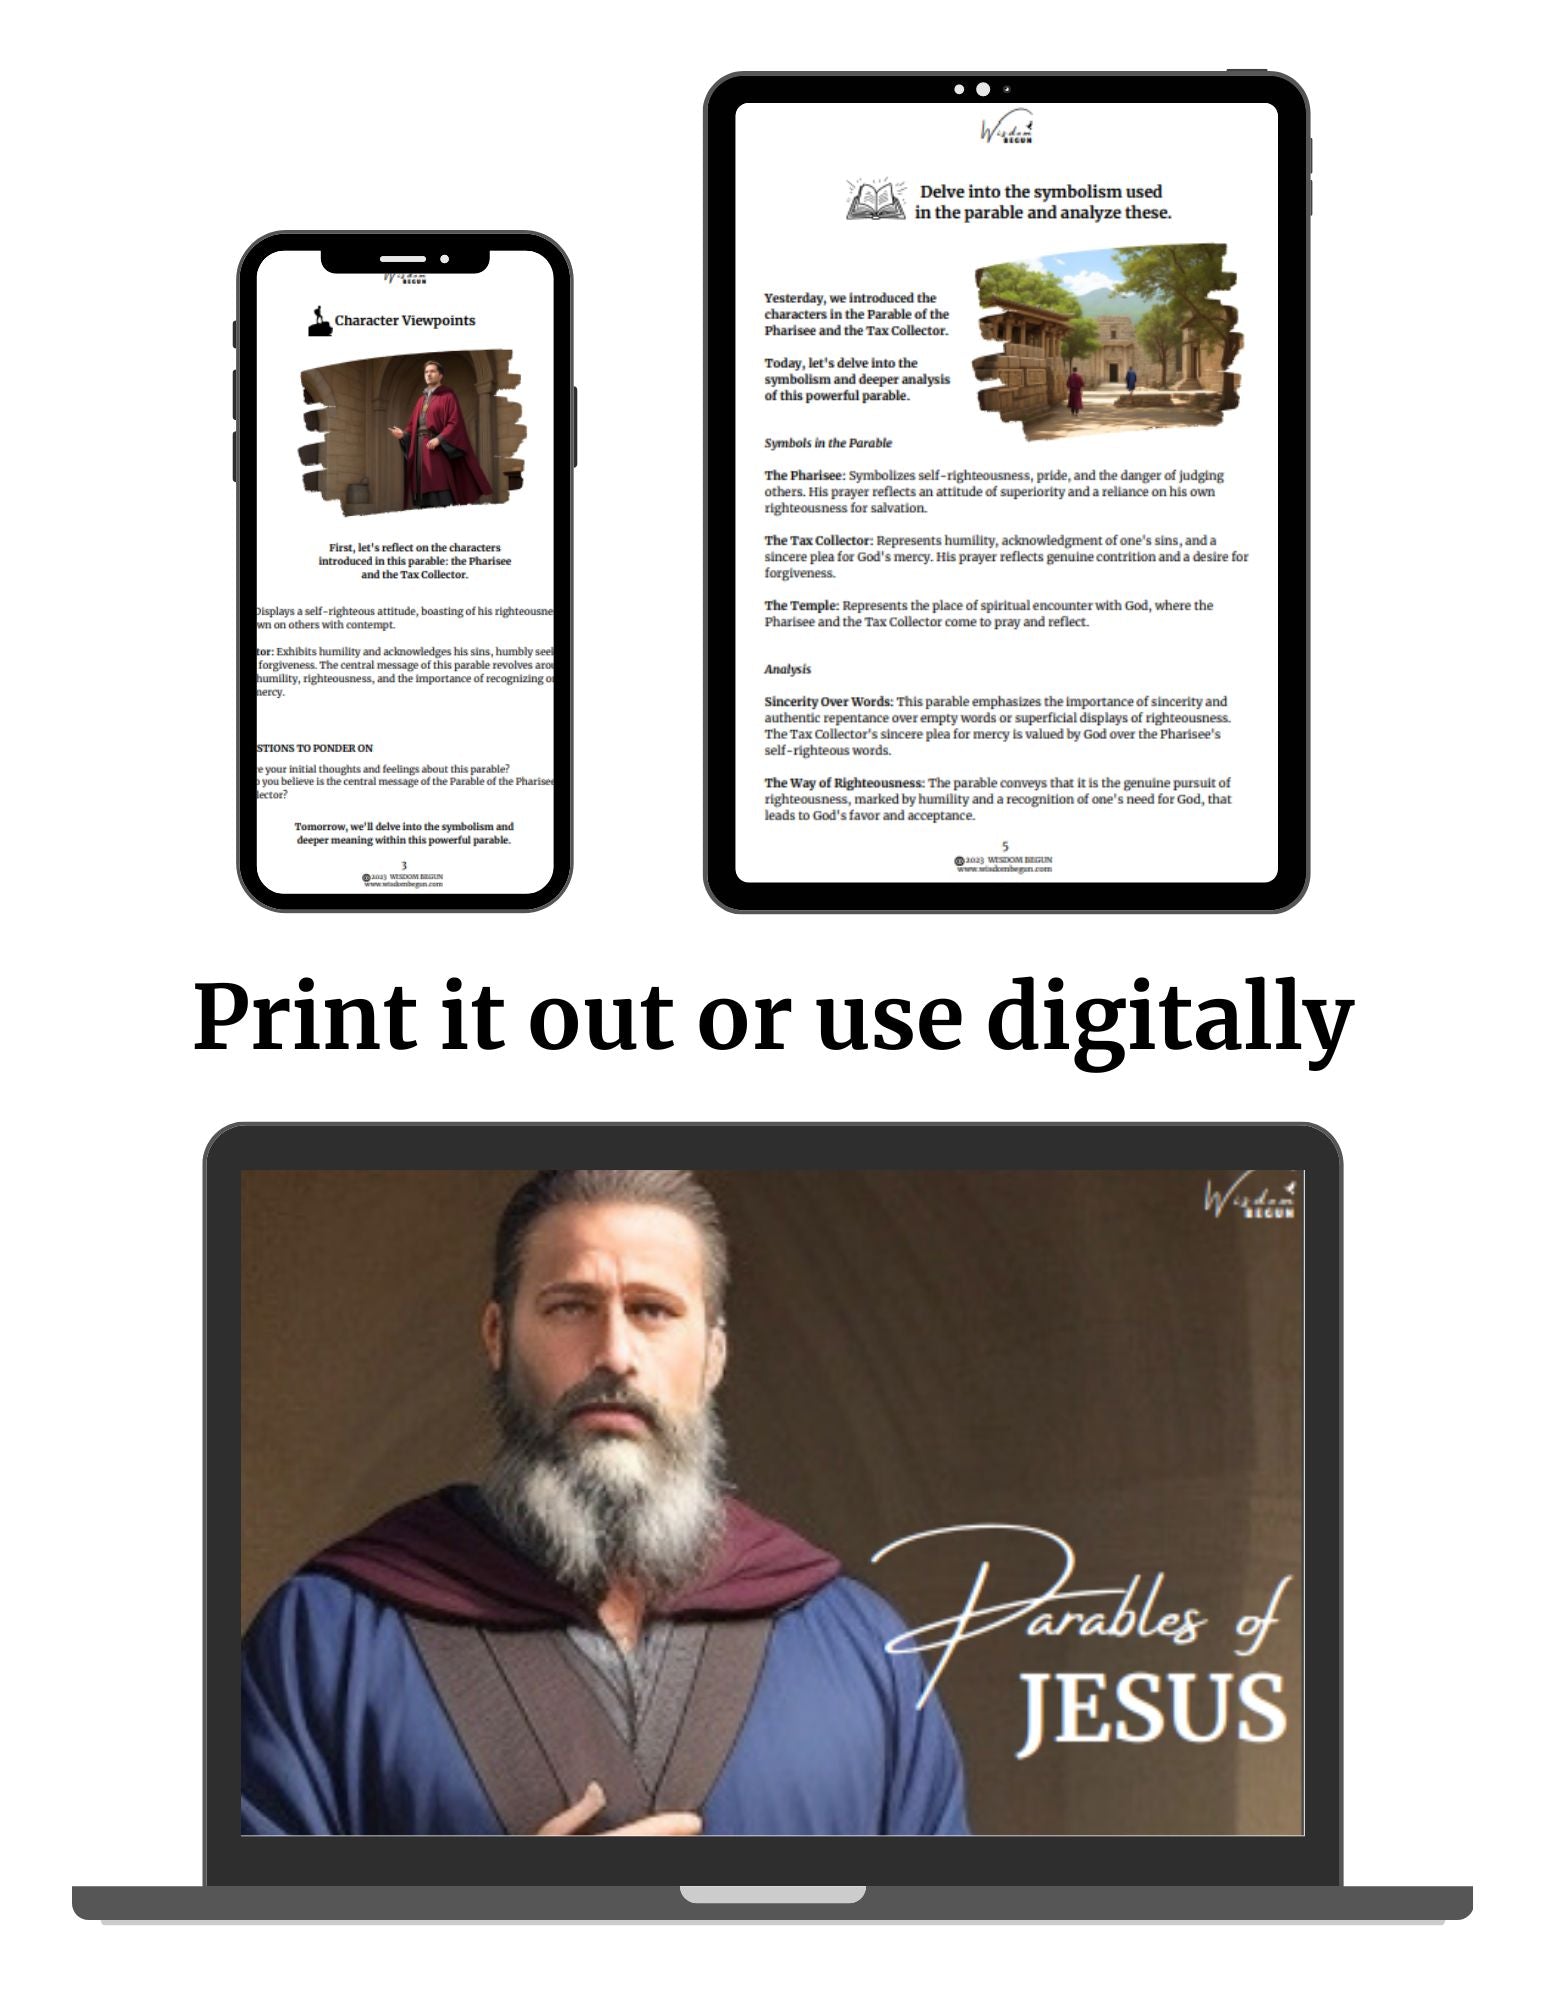 Parables of Jesus 7-Day Course: The Pharisee and the Tax Collector